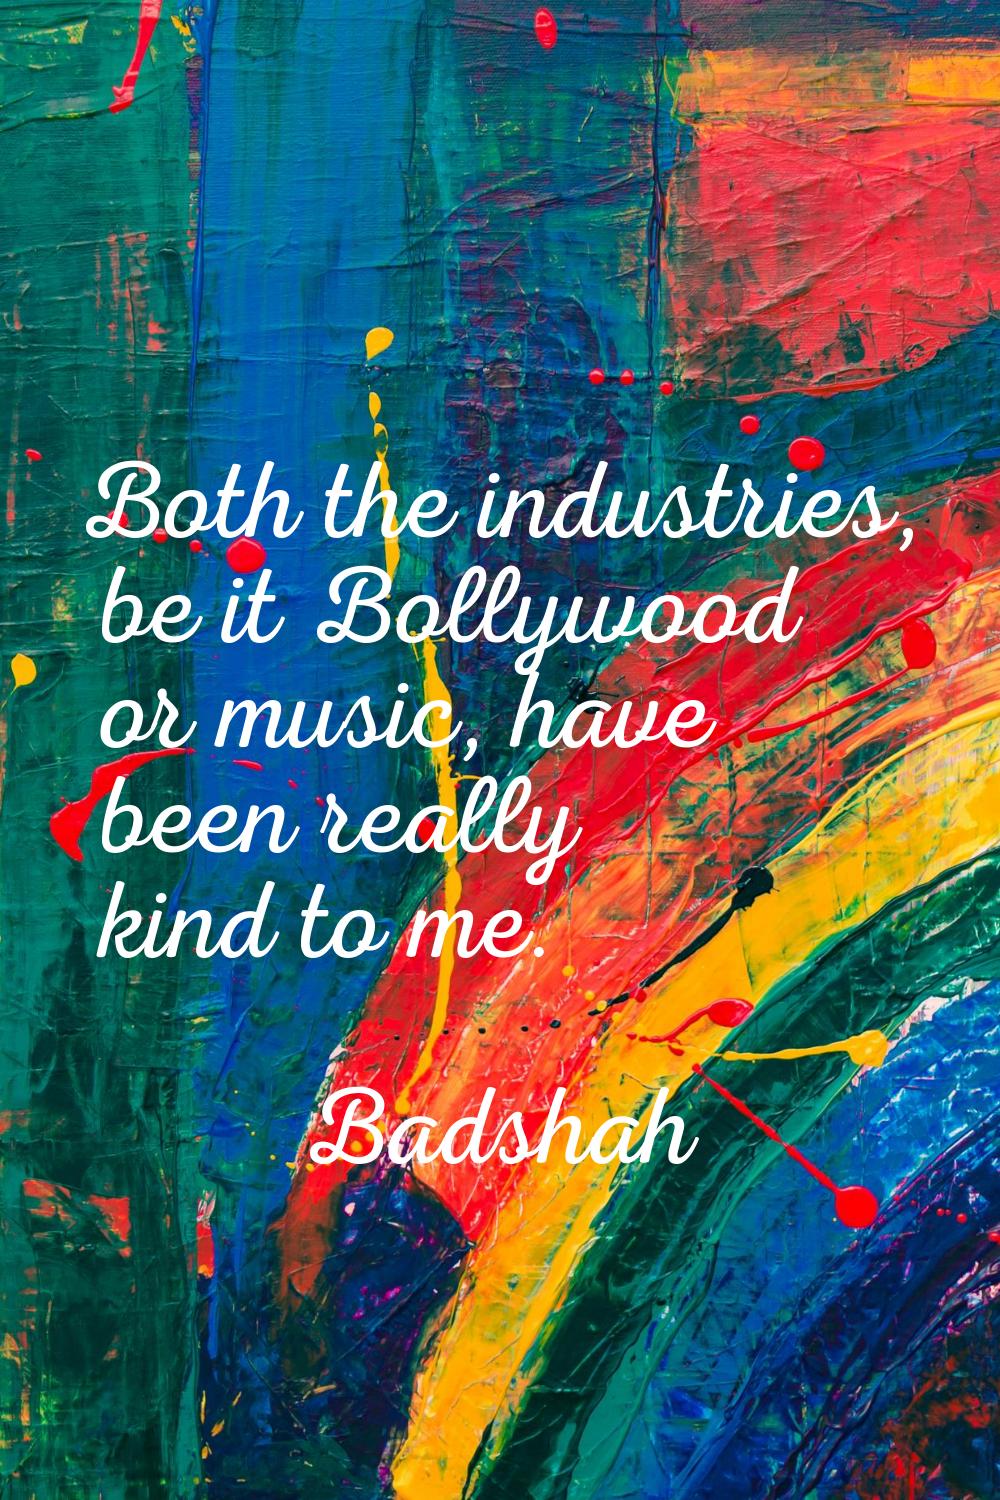 Both the industries, be it Bollywood or music, have been really kind to me.